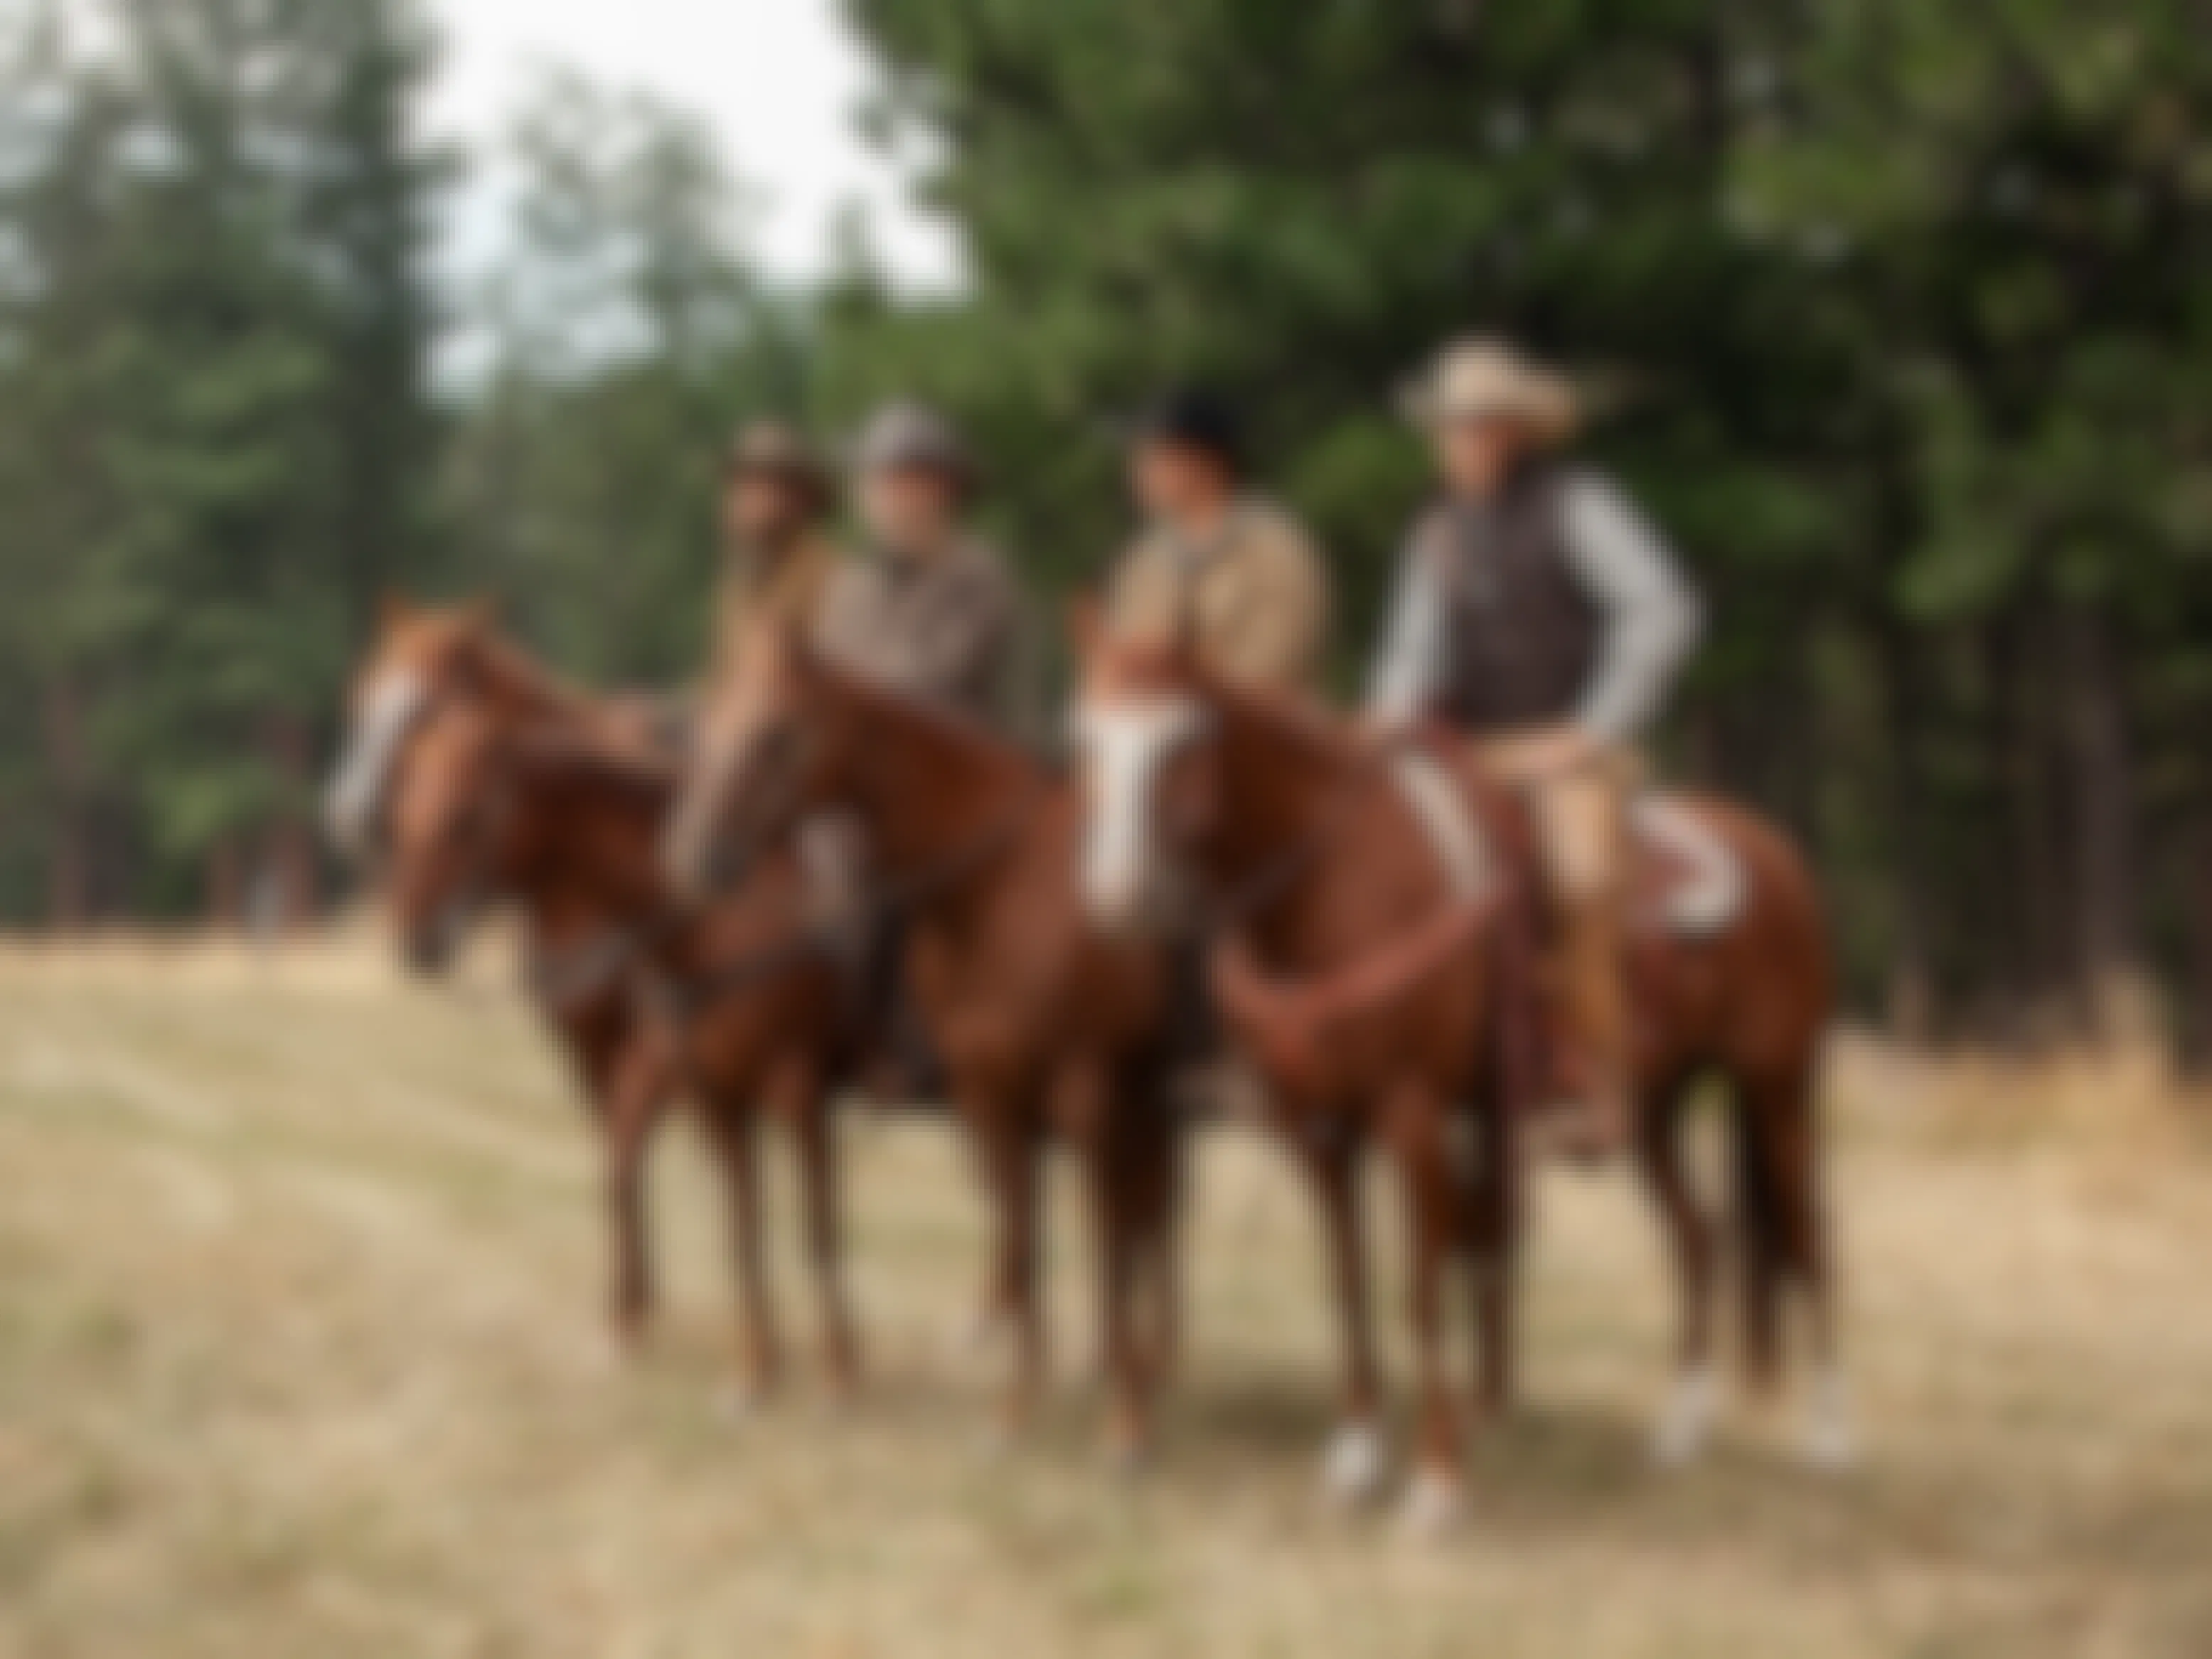 Cast members of Yellowstone on horses in a pasture.